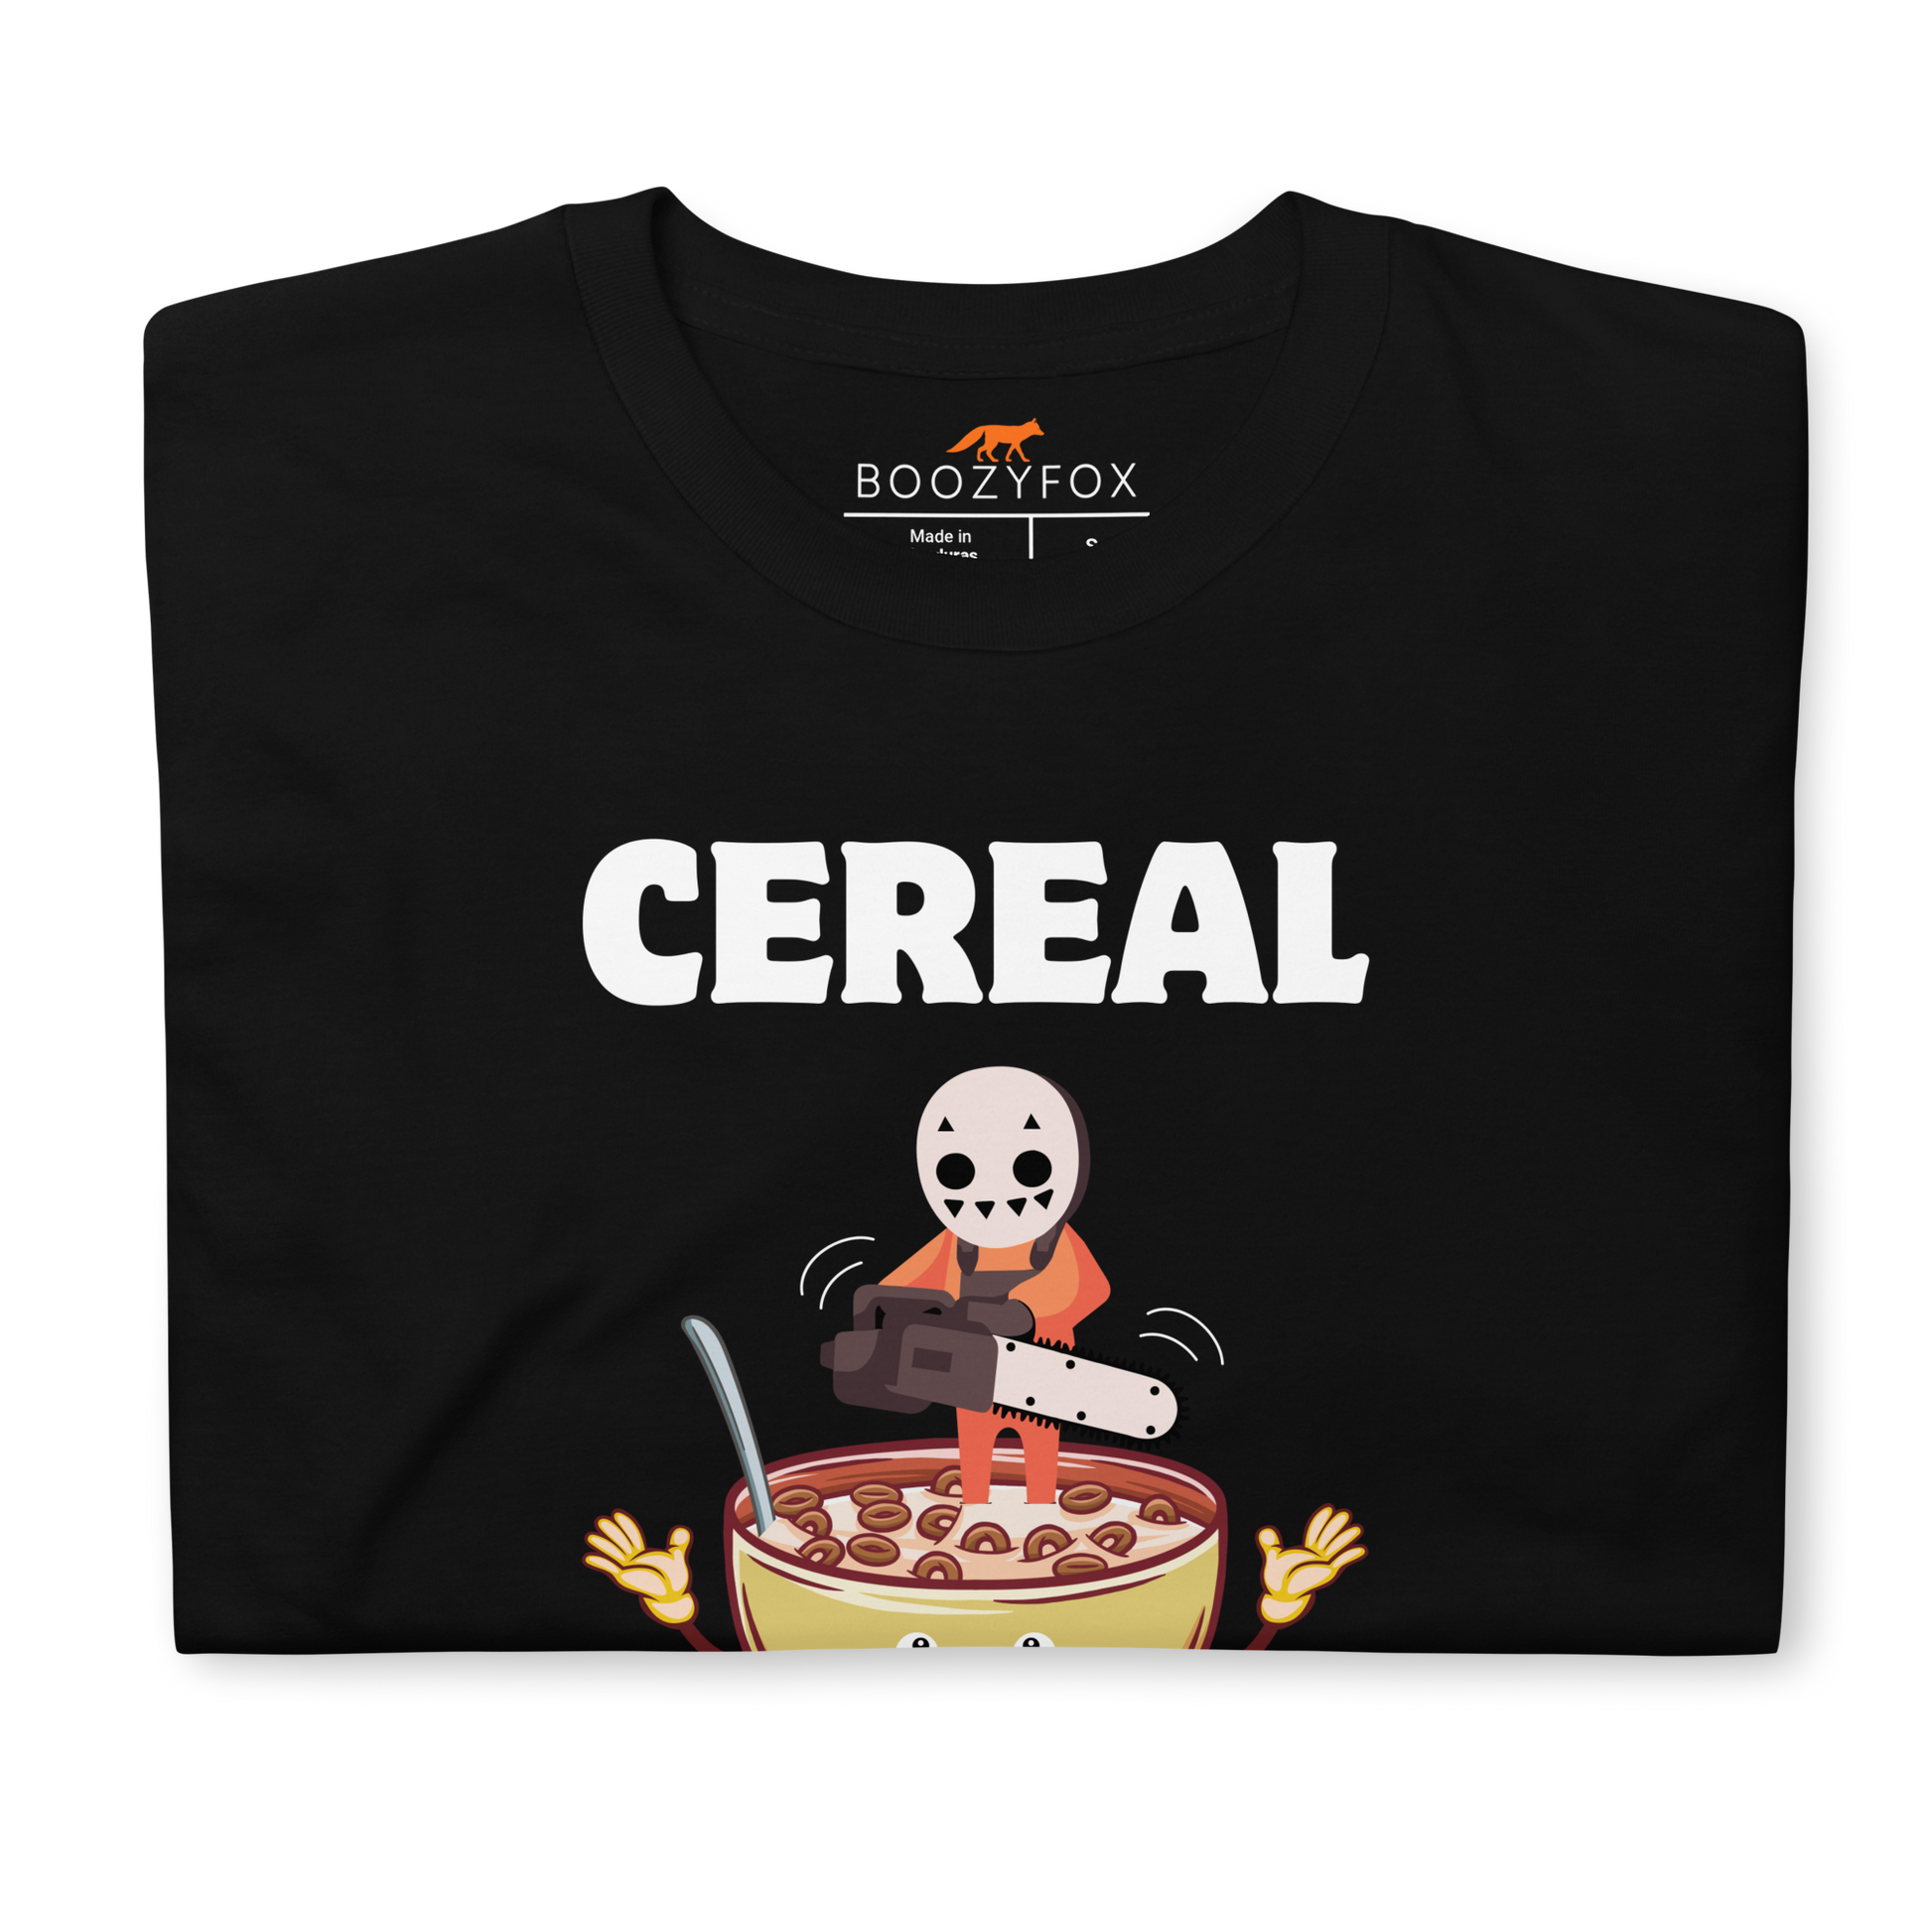 Front details of a Black Cereal Killer T-Shirt featuring a Cereal Killer graphic on the chest - Funny Graphic T-Shirts - Boozy Fox